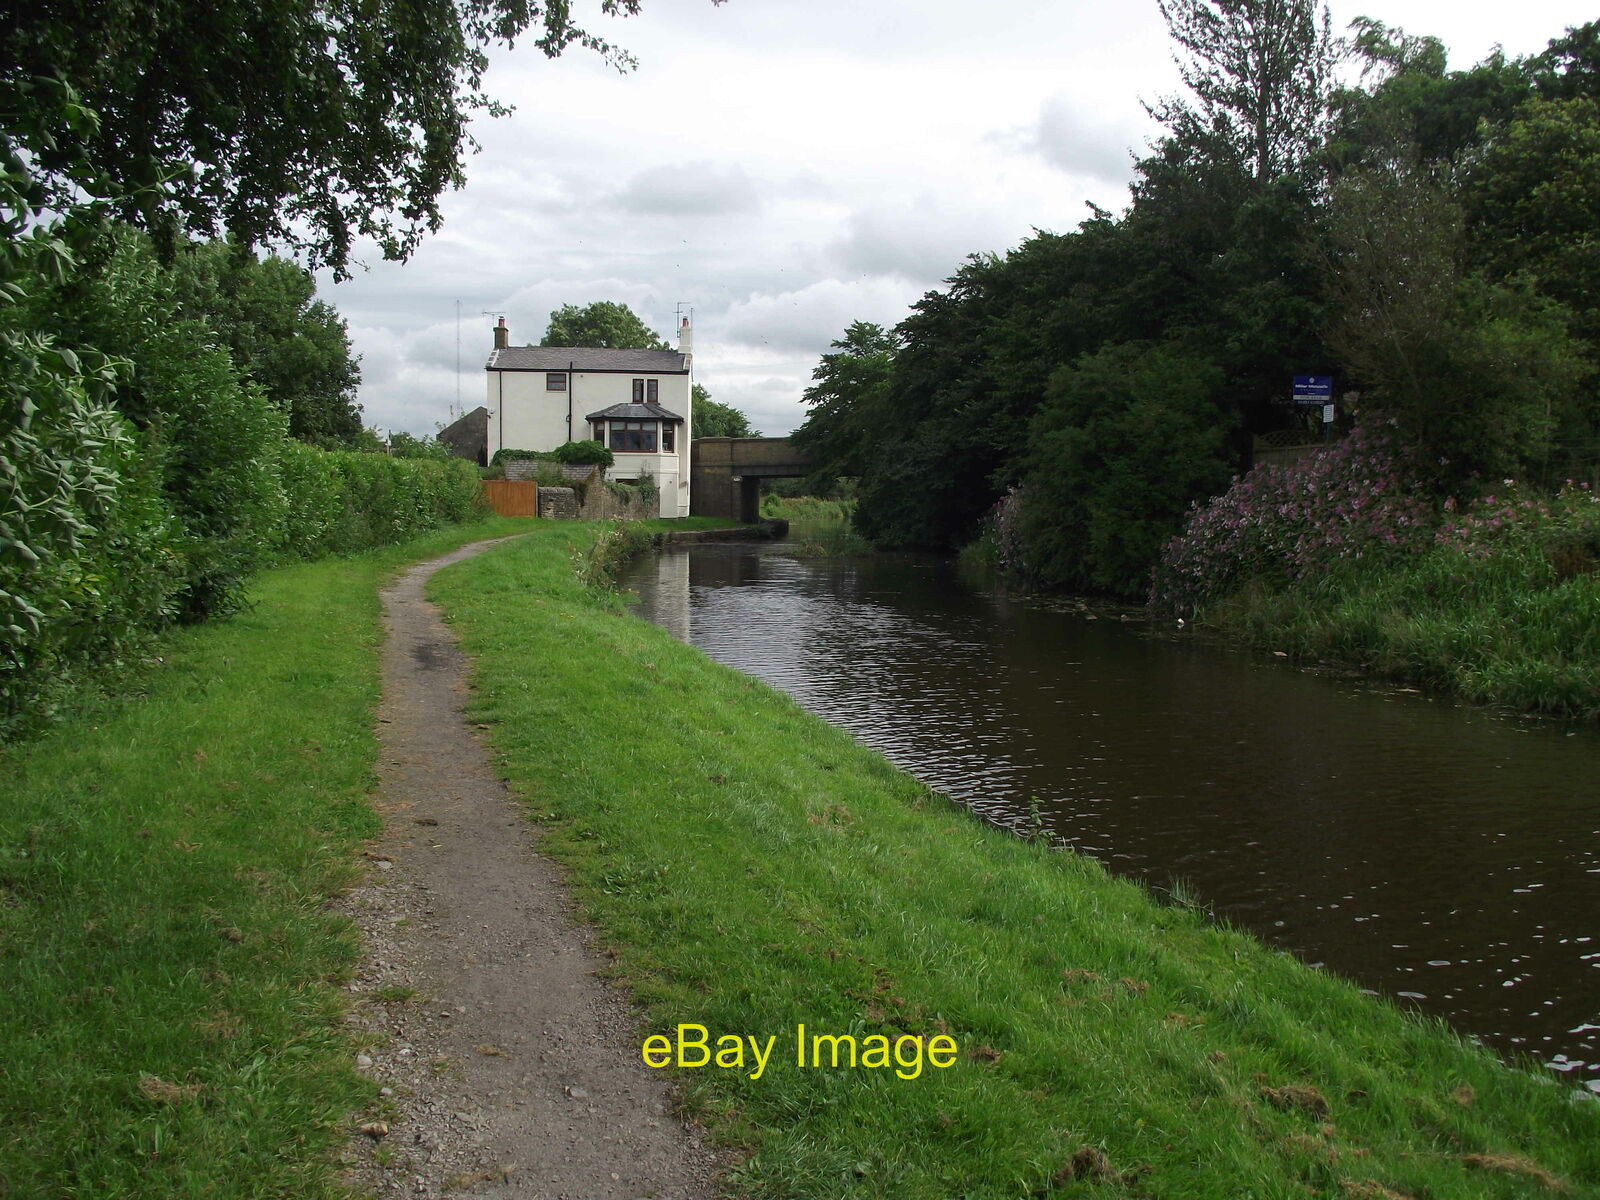 Photo 12x8 House by the canal Riley Green Cottage and Riley Green Canal Br c2012